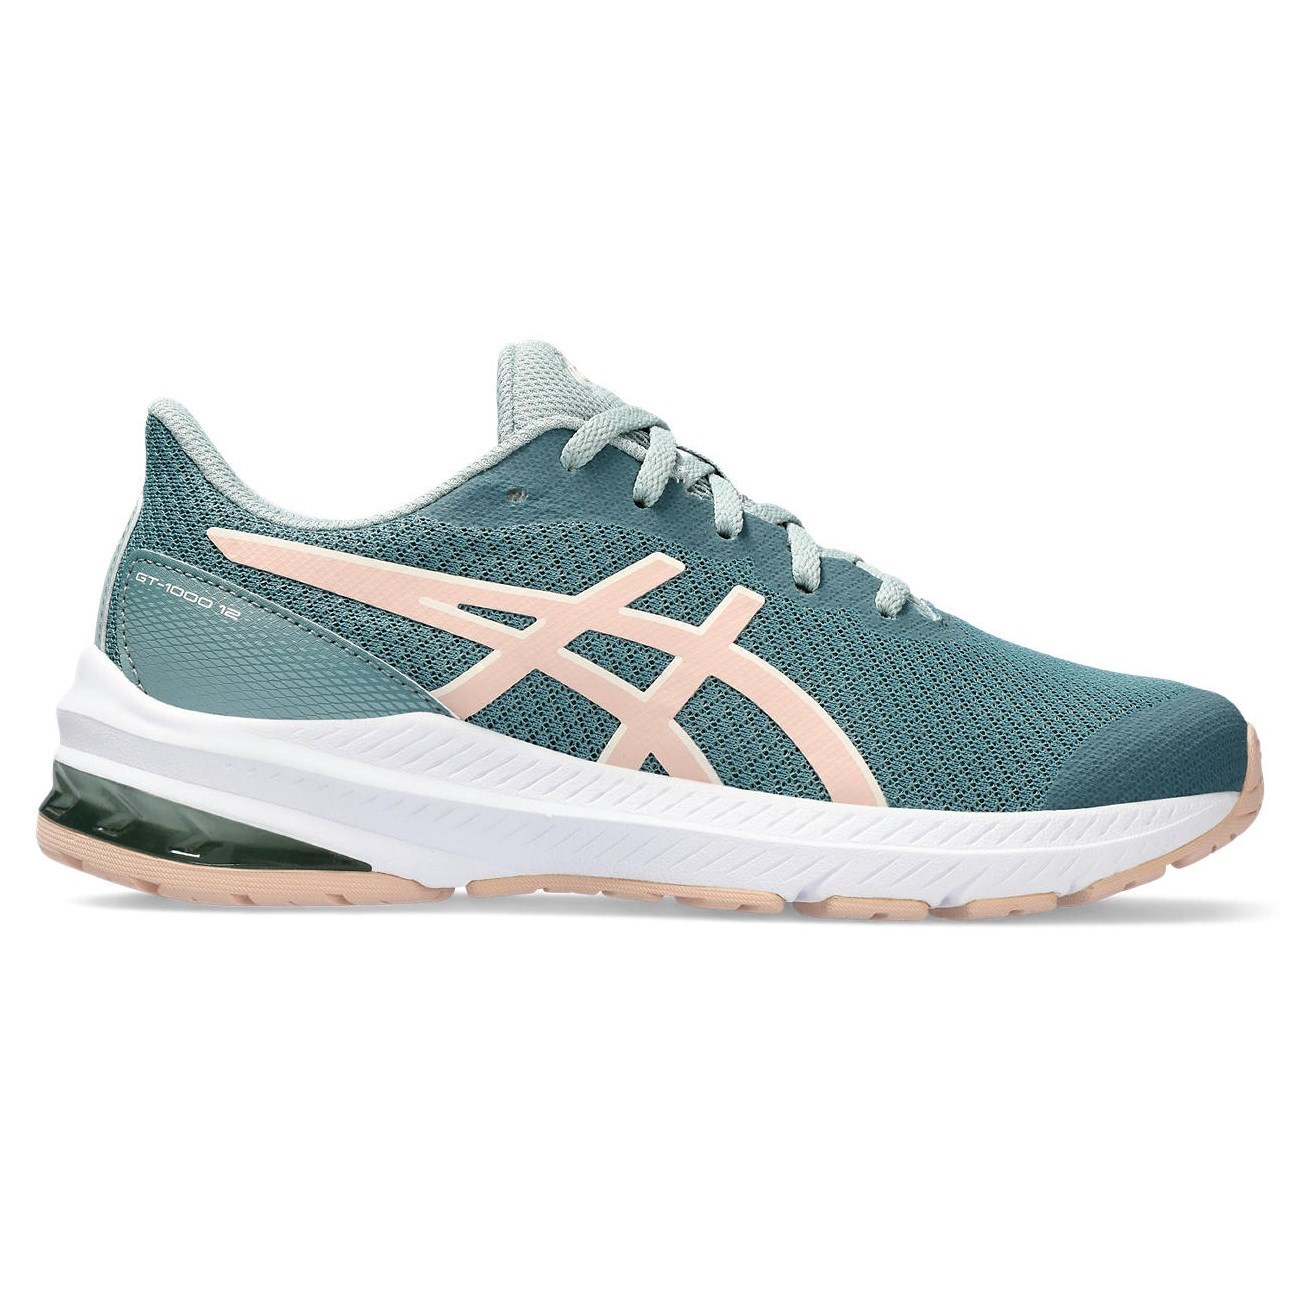 Asics GT-1000 12 GS - Kids Running Shoes - Foggy Teal/Pale Apricot ...